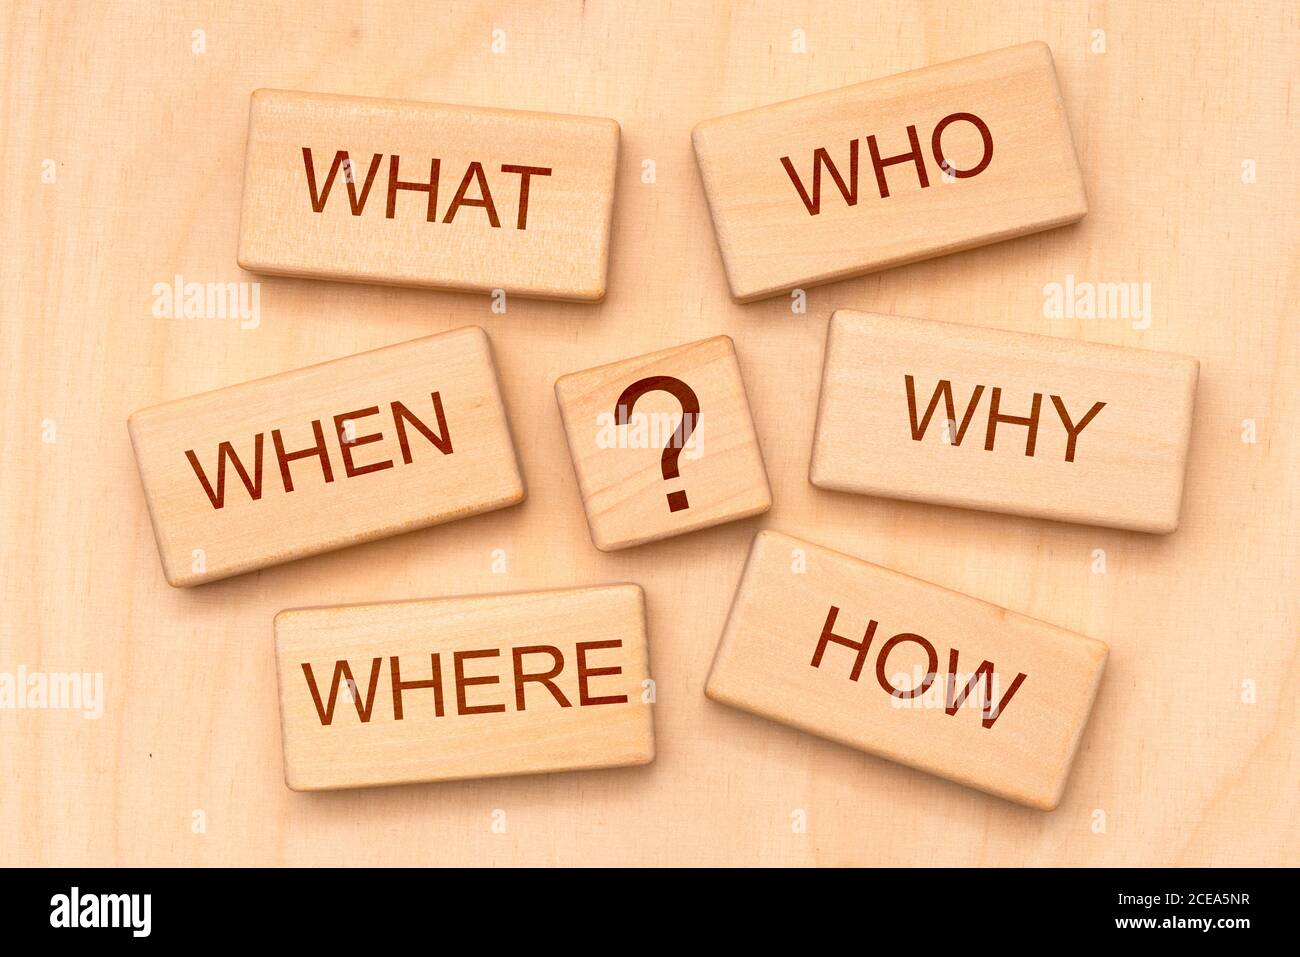 W-questions as basic for journalism printed on cubes Stock Photo